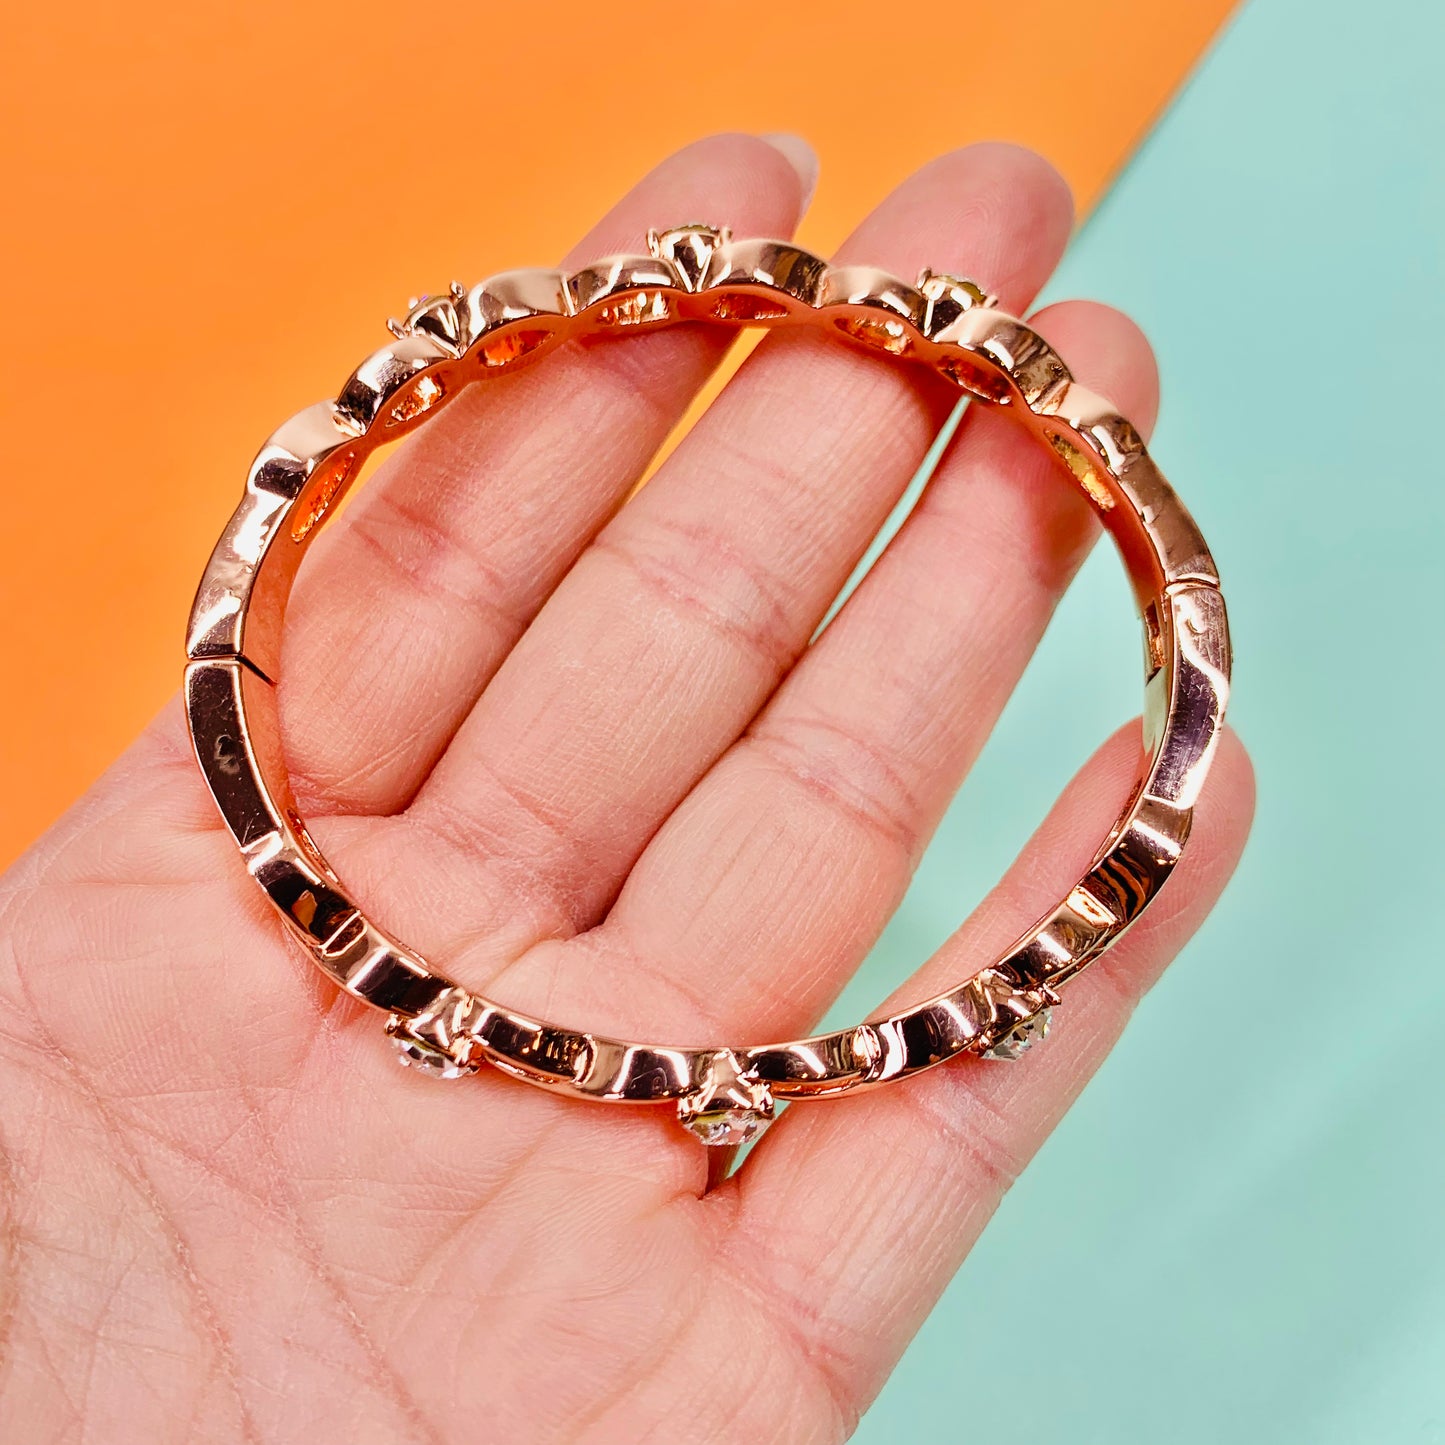 Vintage electroplated rose gold bangle with clear crystals